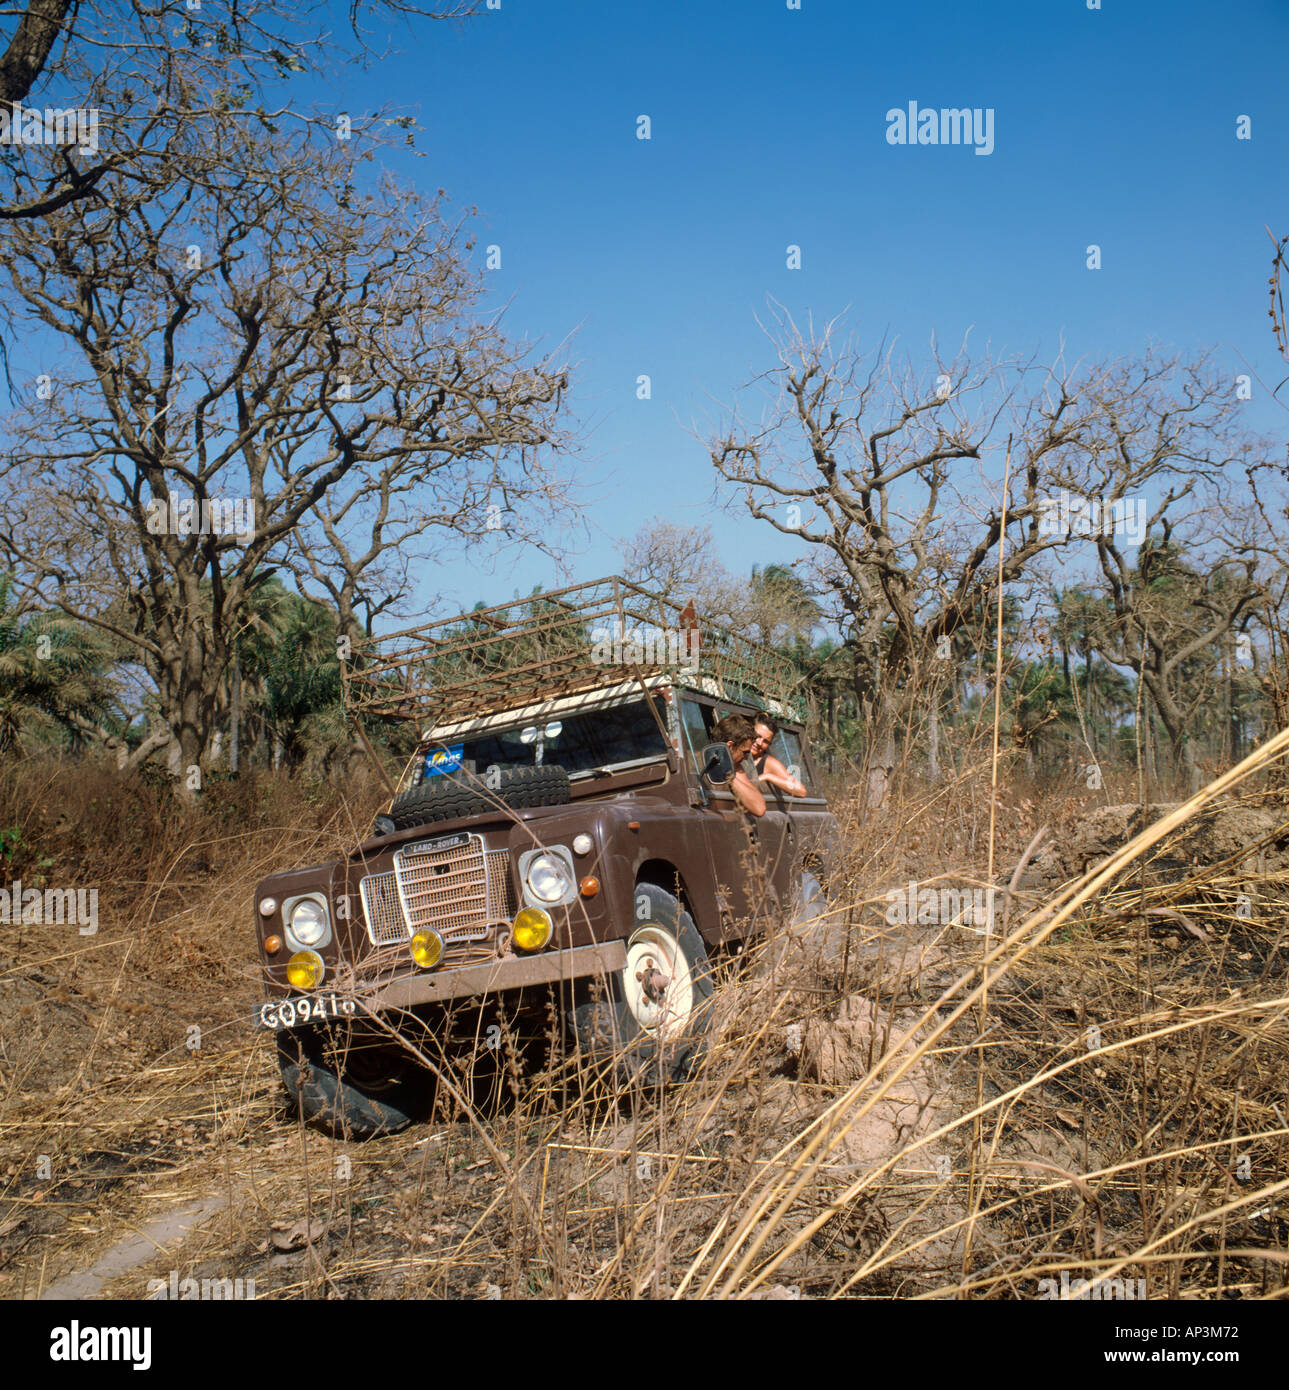 Landrover Safari, The Gambia, West Africa Stock Photo